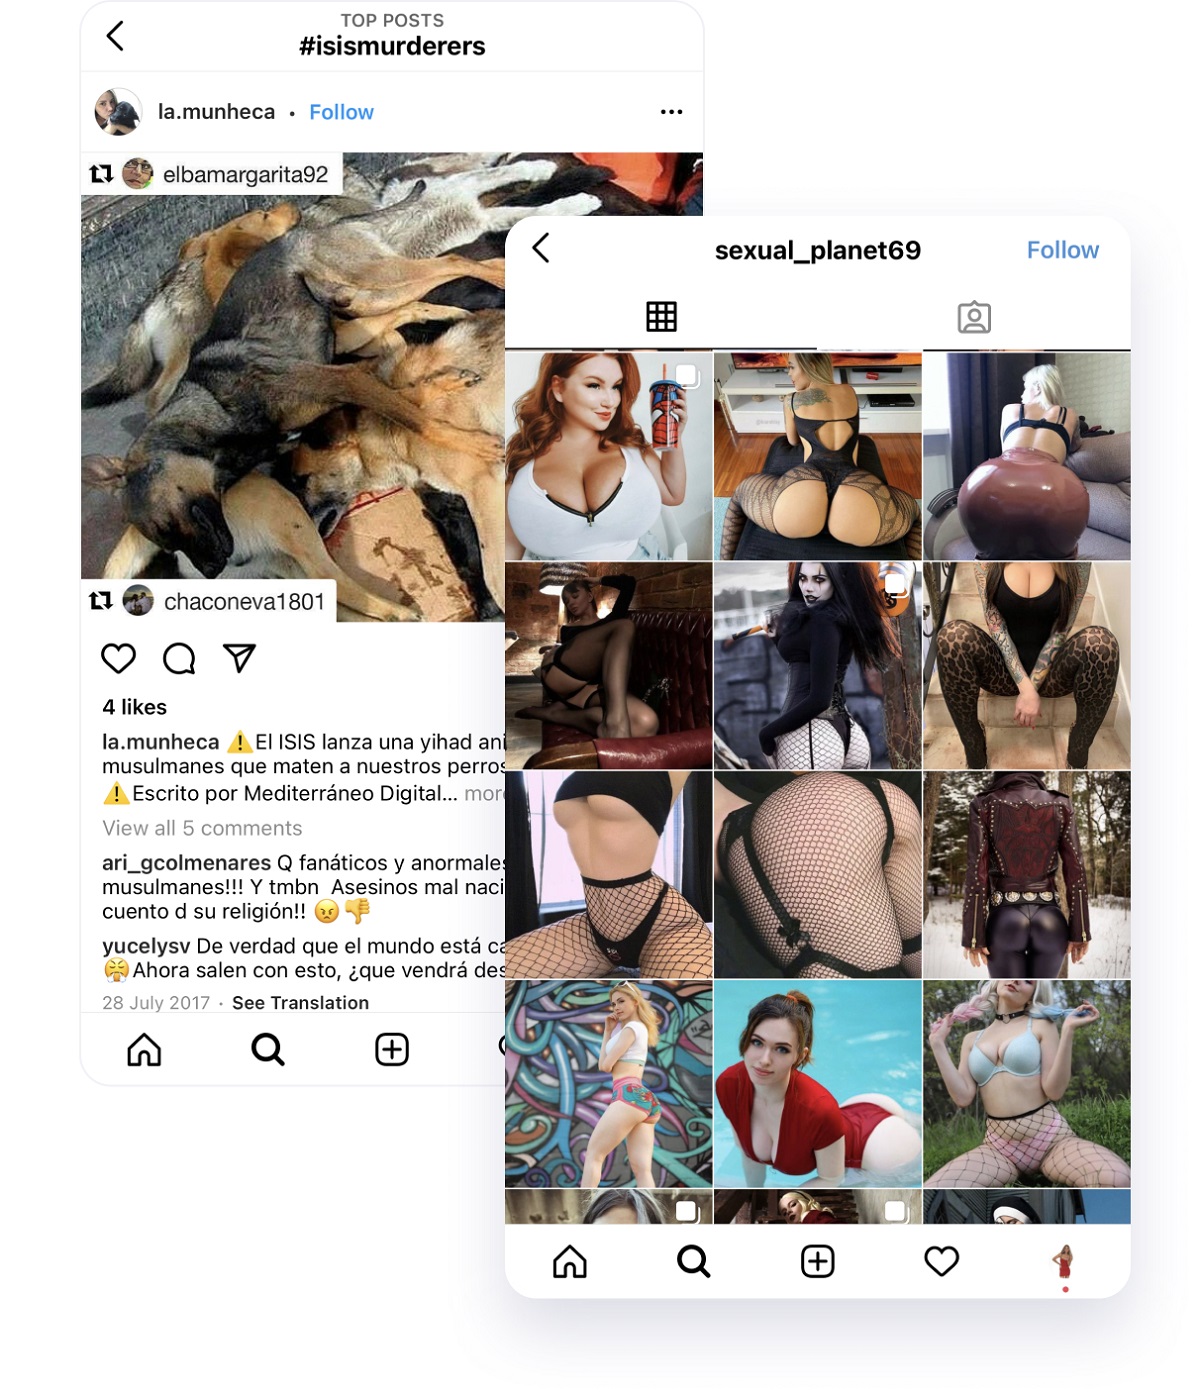 Instagram account shadowbanned